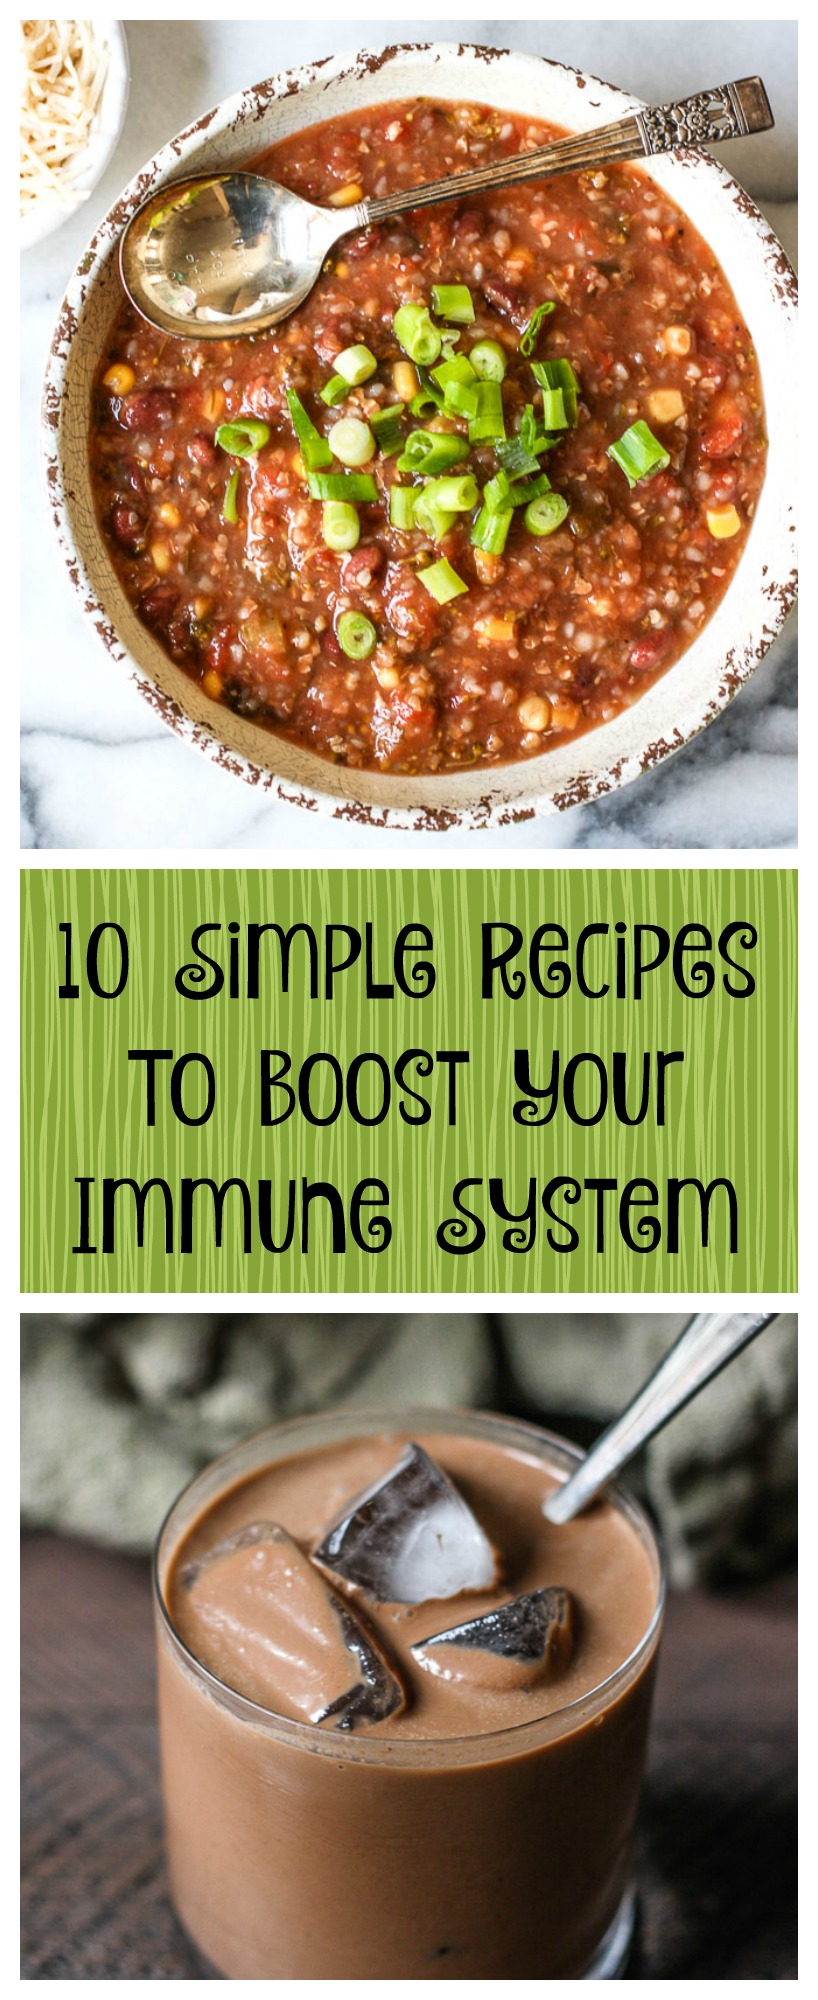 10 simple recipes to boost your immune system